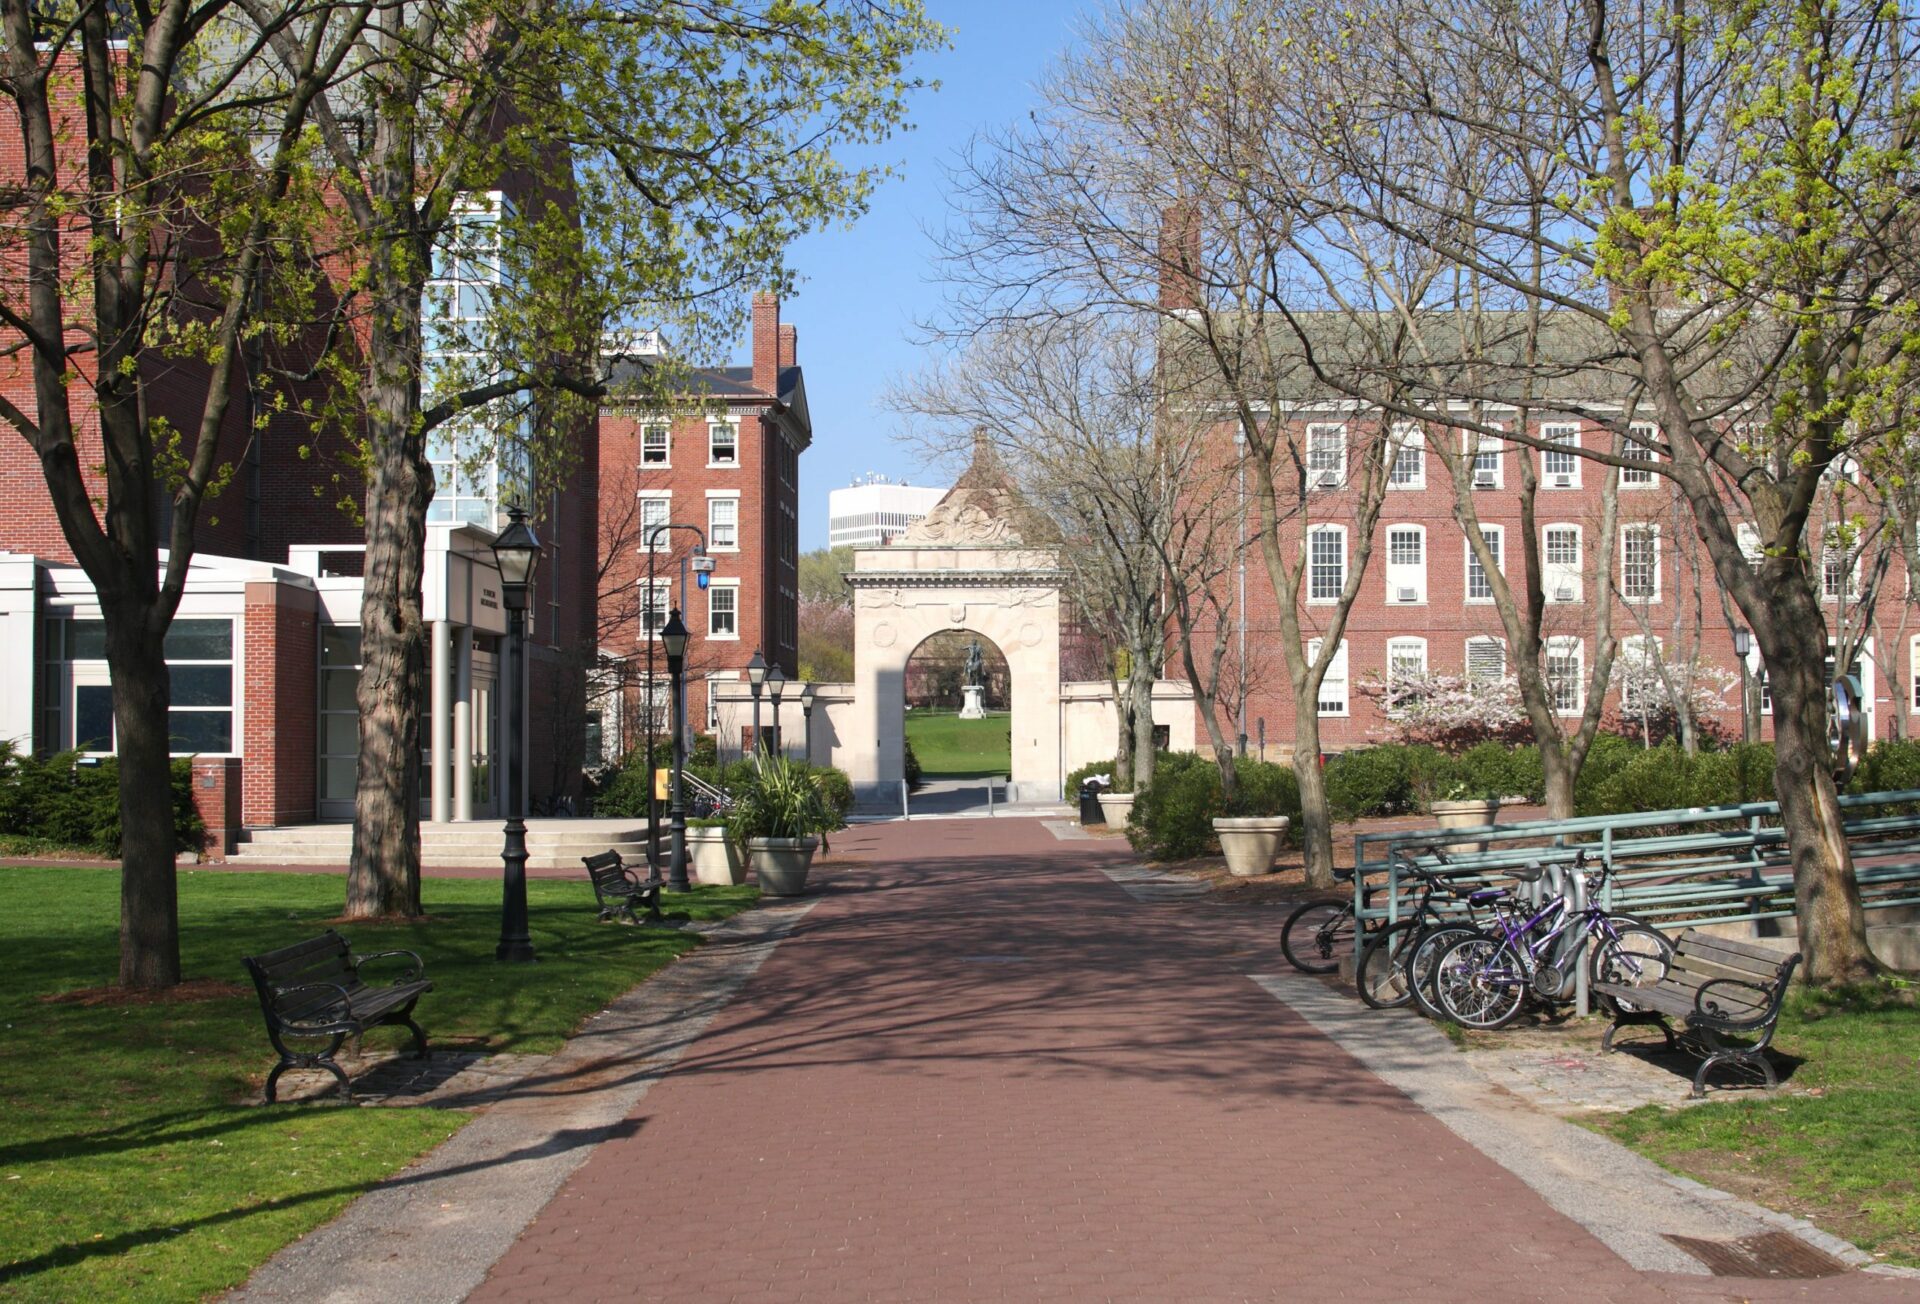 Brown University is located in Providence, Rhode Island, and a member of the Ivy League.